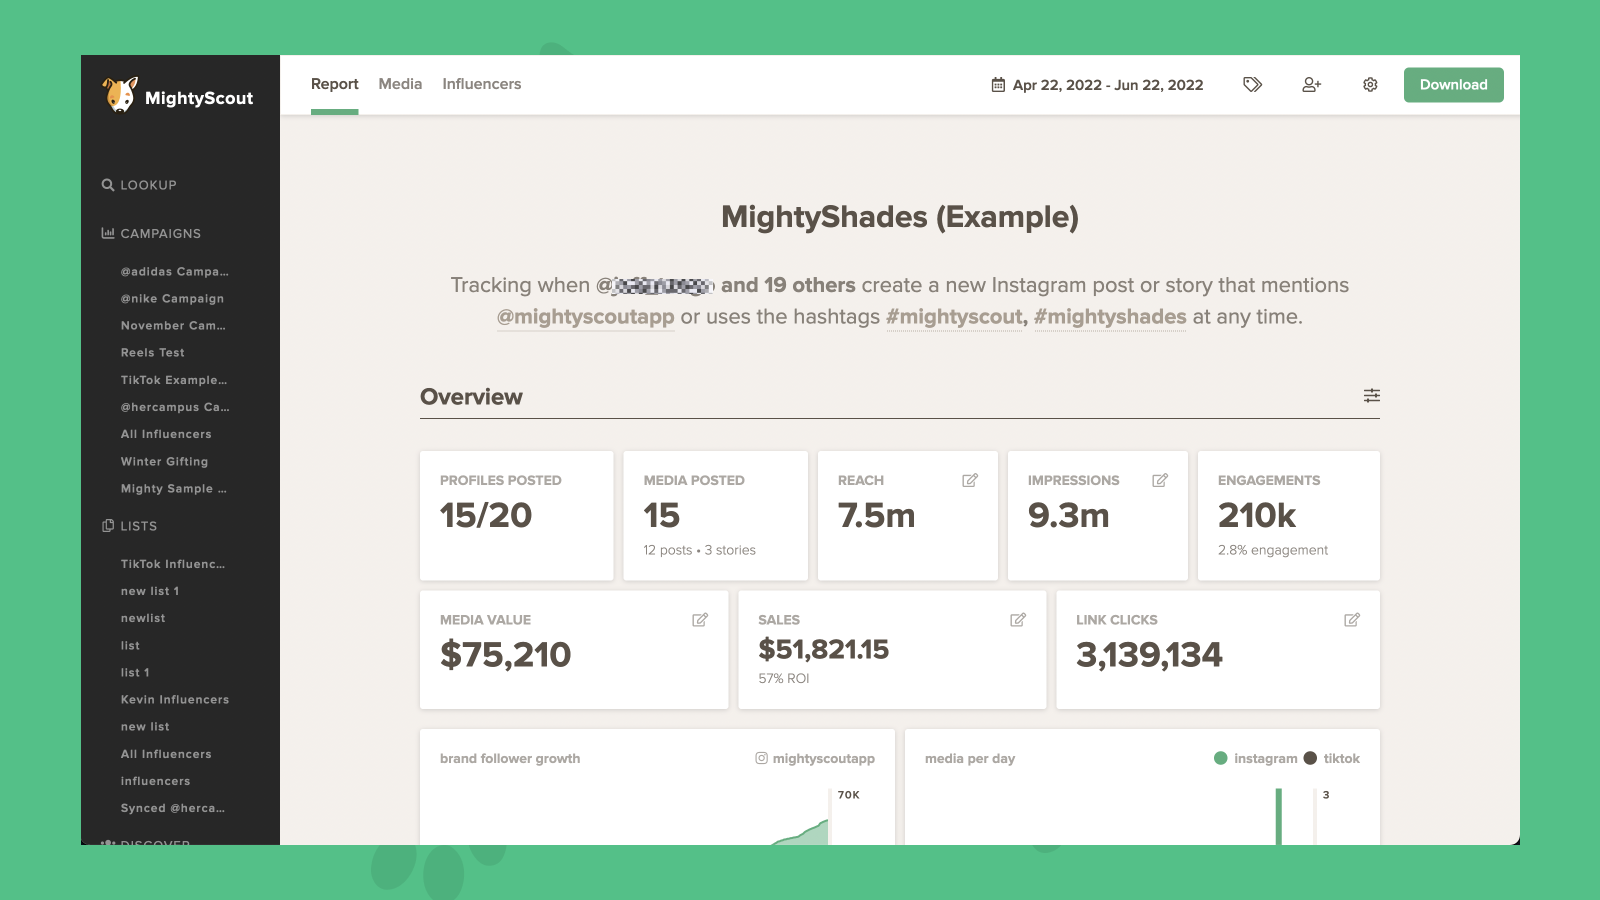 Influencer campaign reporting and metrics dashboard